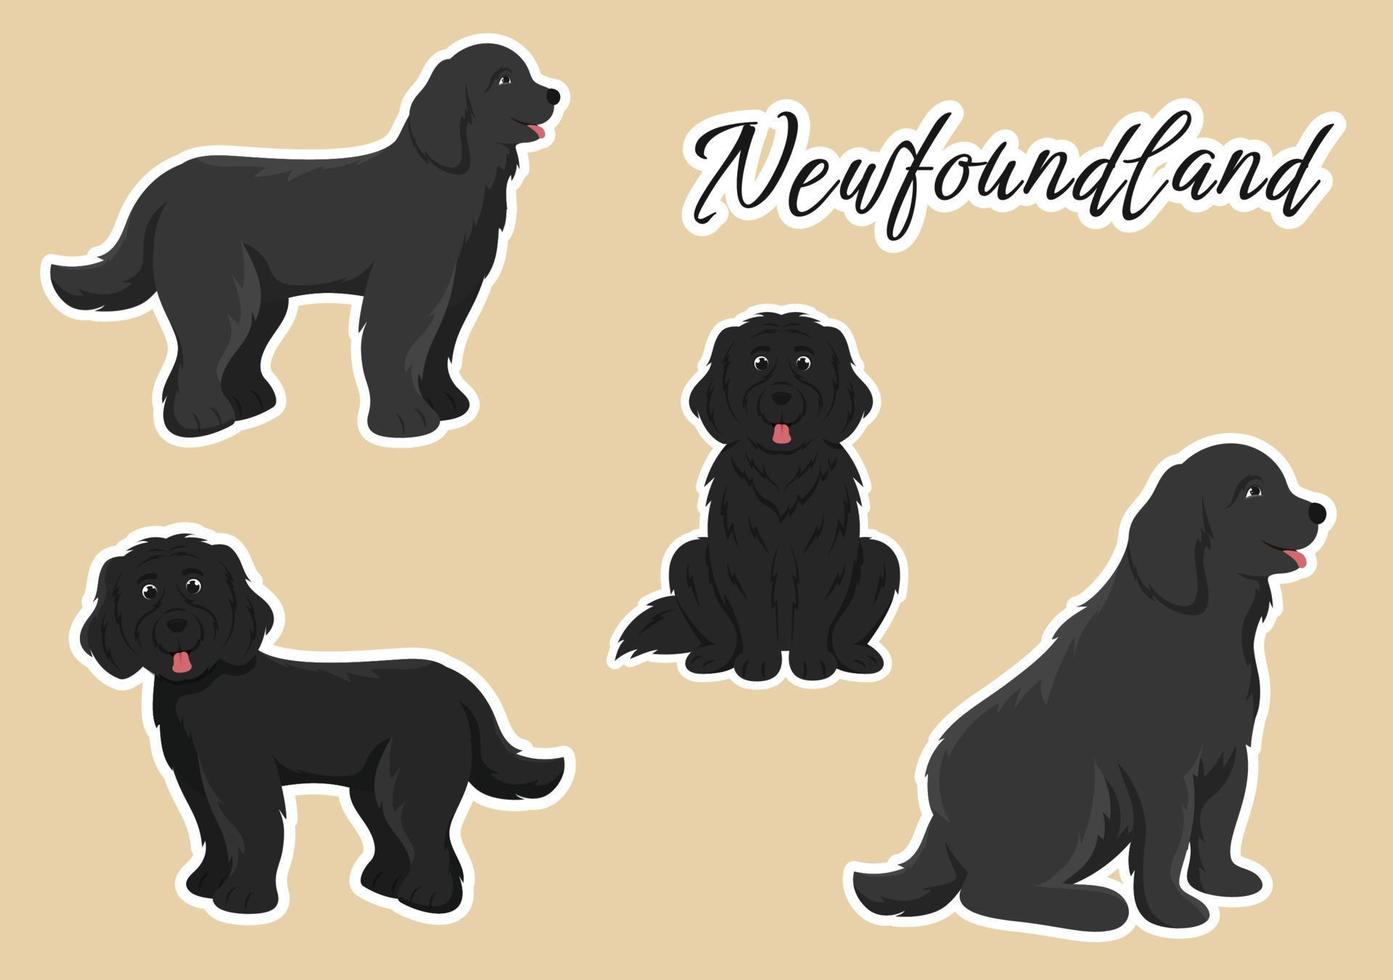 Newfoundland Dog Animals with Black, Brown or Landseer Color in Flat Style Cute Cartoon Template Hand Drawn Illustration vector